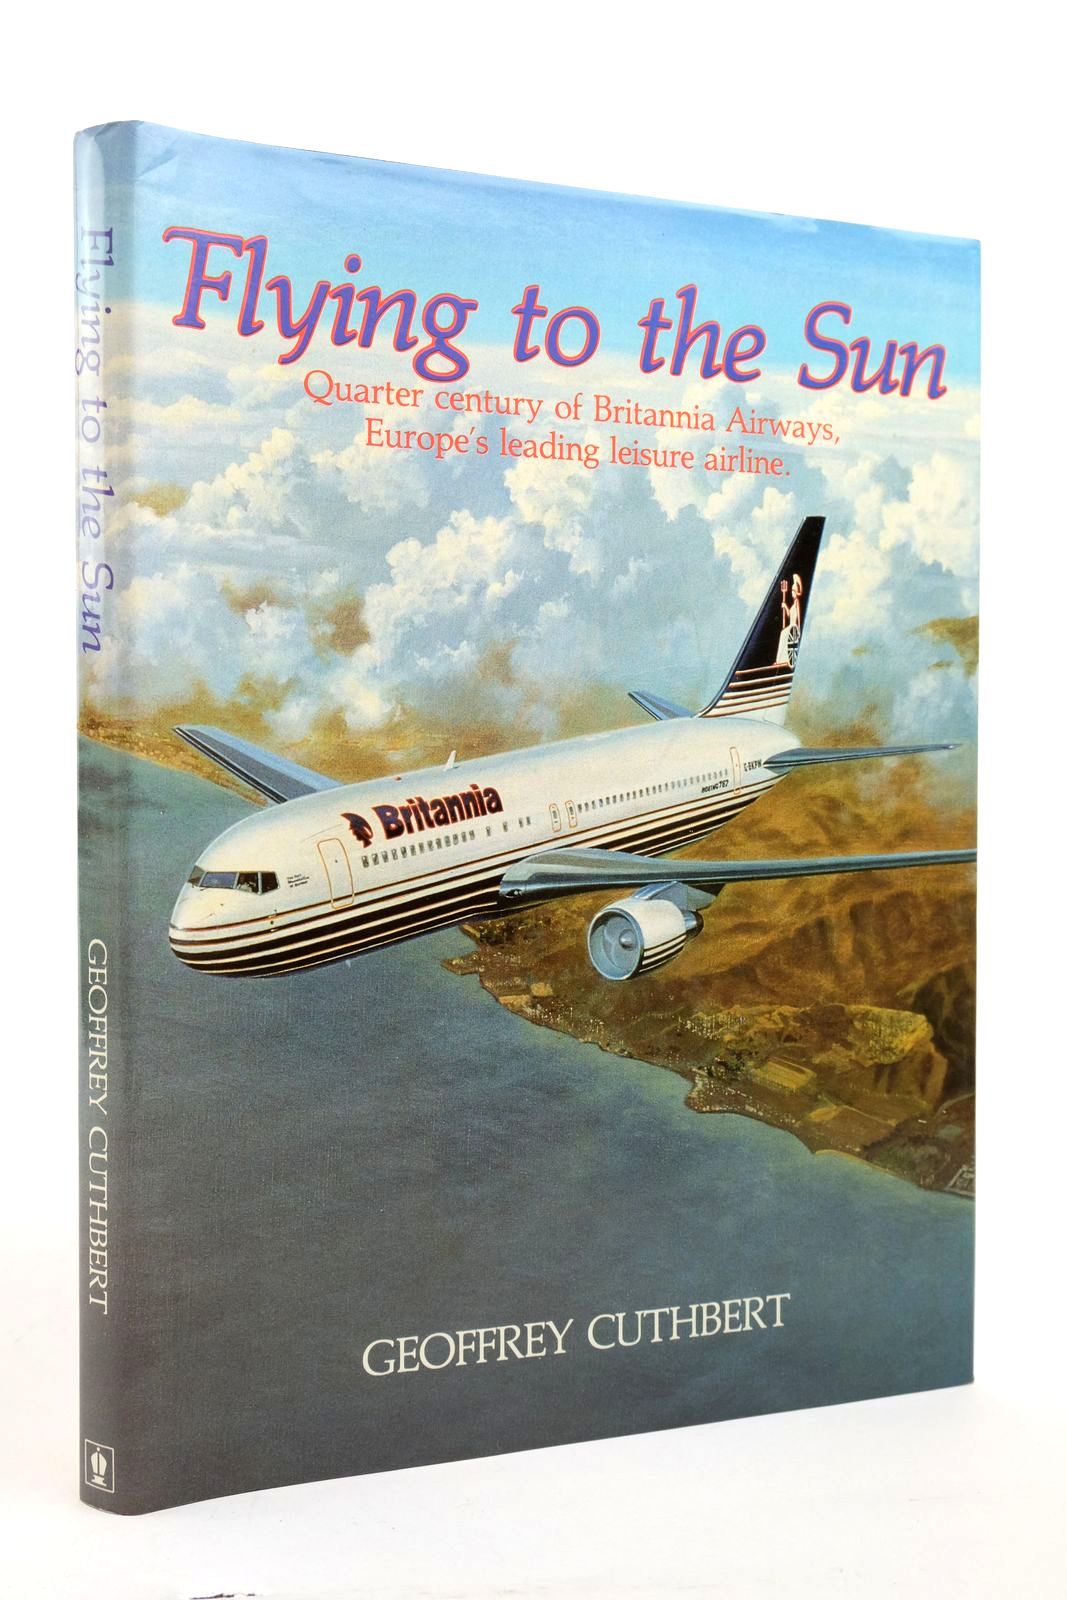 Photo of FLYING TO THE SUN written by Cuthbert, Geoffrey published by Hodder & Stoughton (STOCK CODE: 2139579)  for sale by Stella & Rose's Books